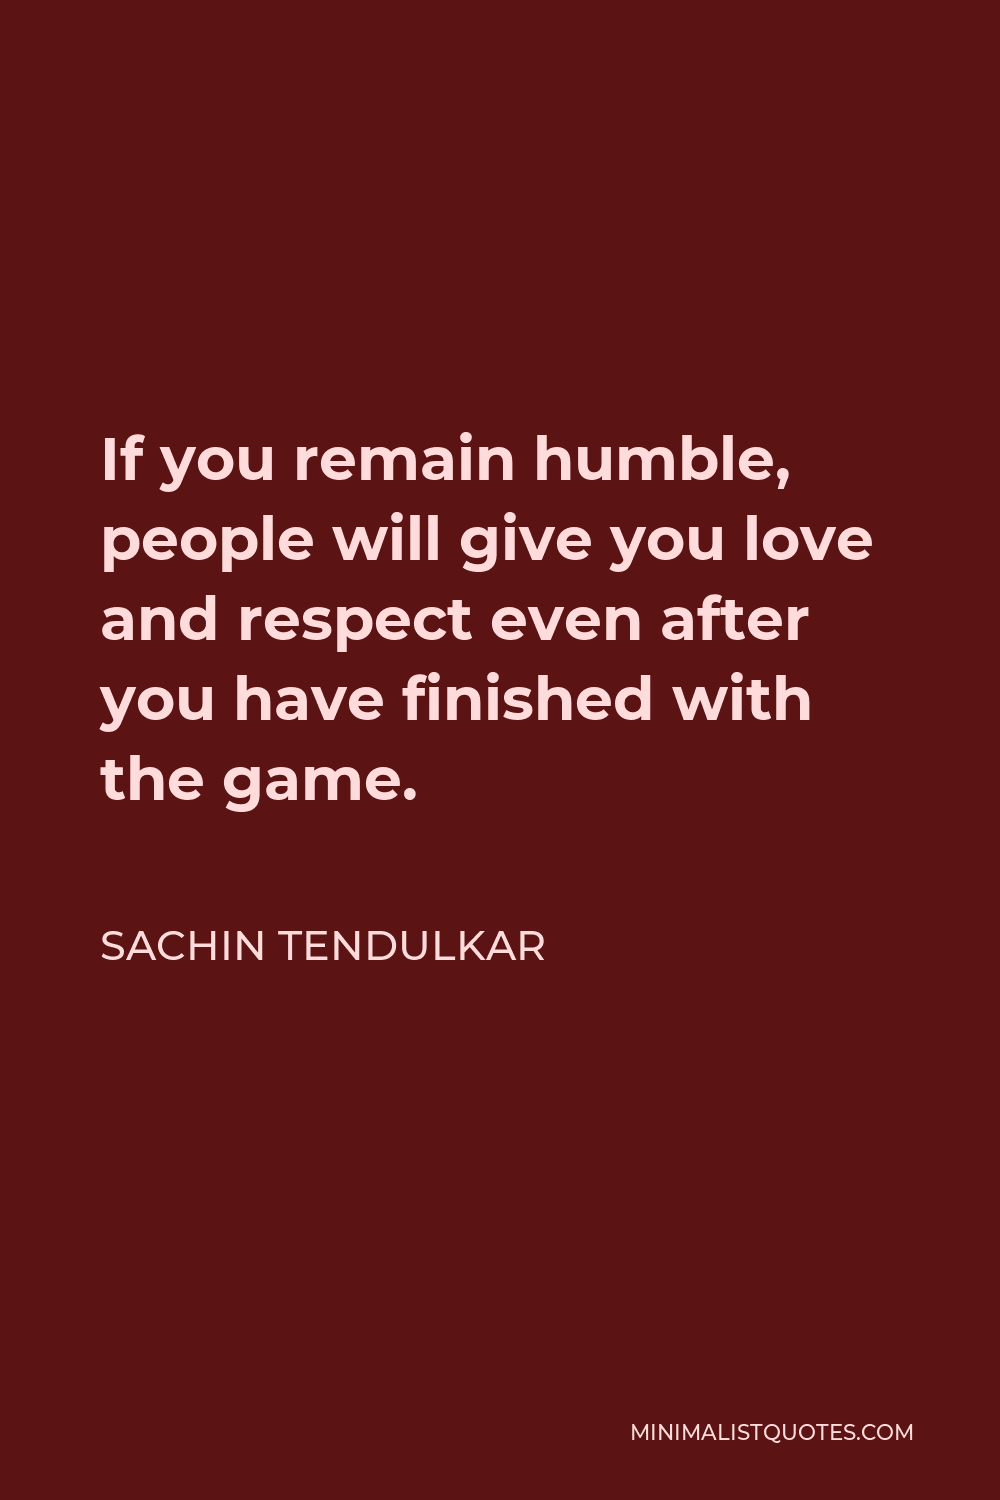 Sachin Tendulkar Quote - If you remain humble, people will give you love and respect even after you have finished with the game.